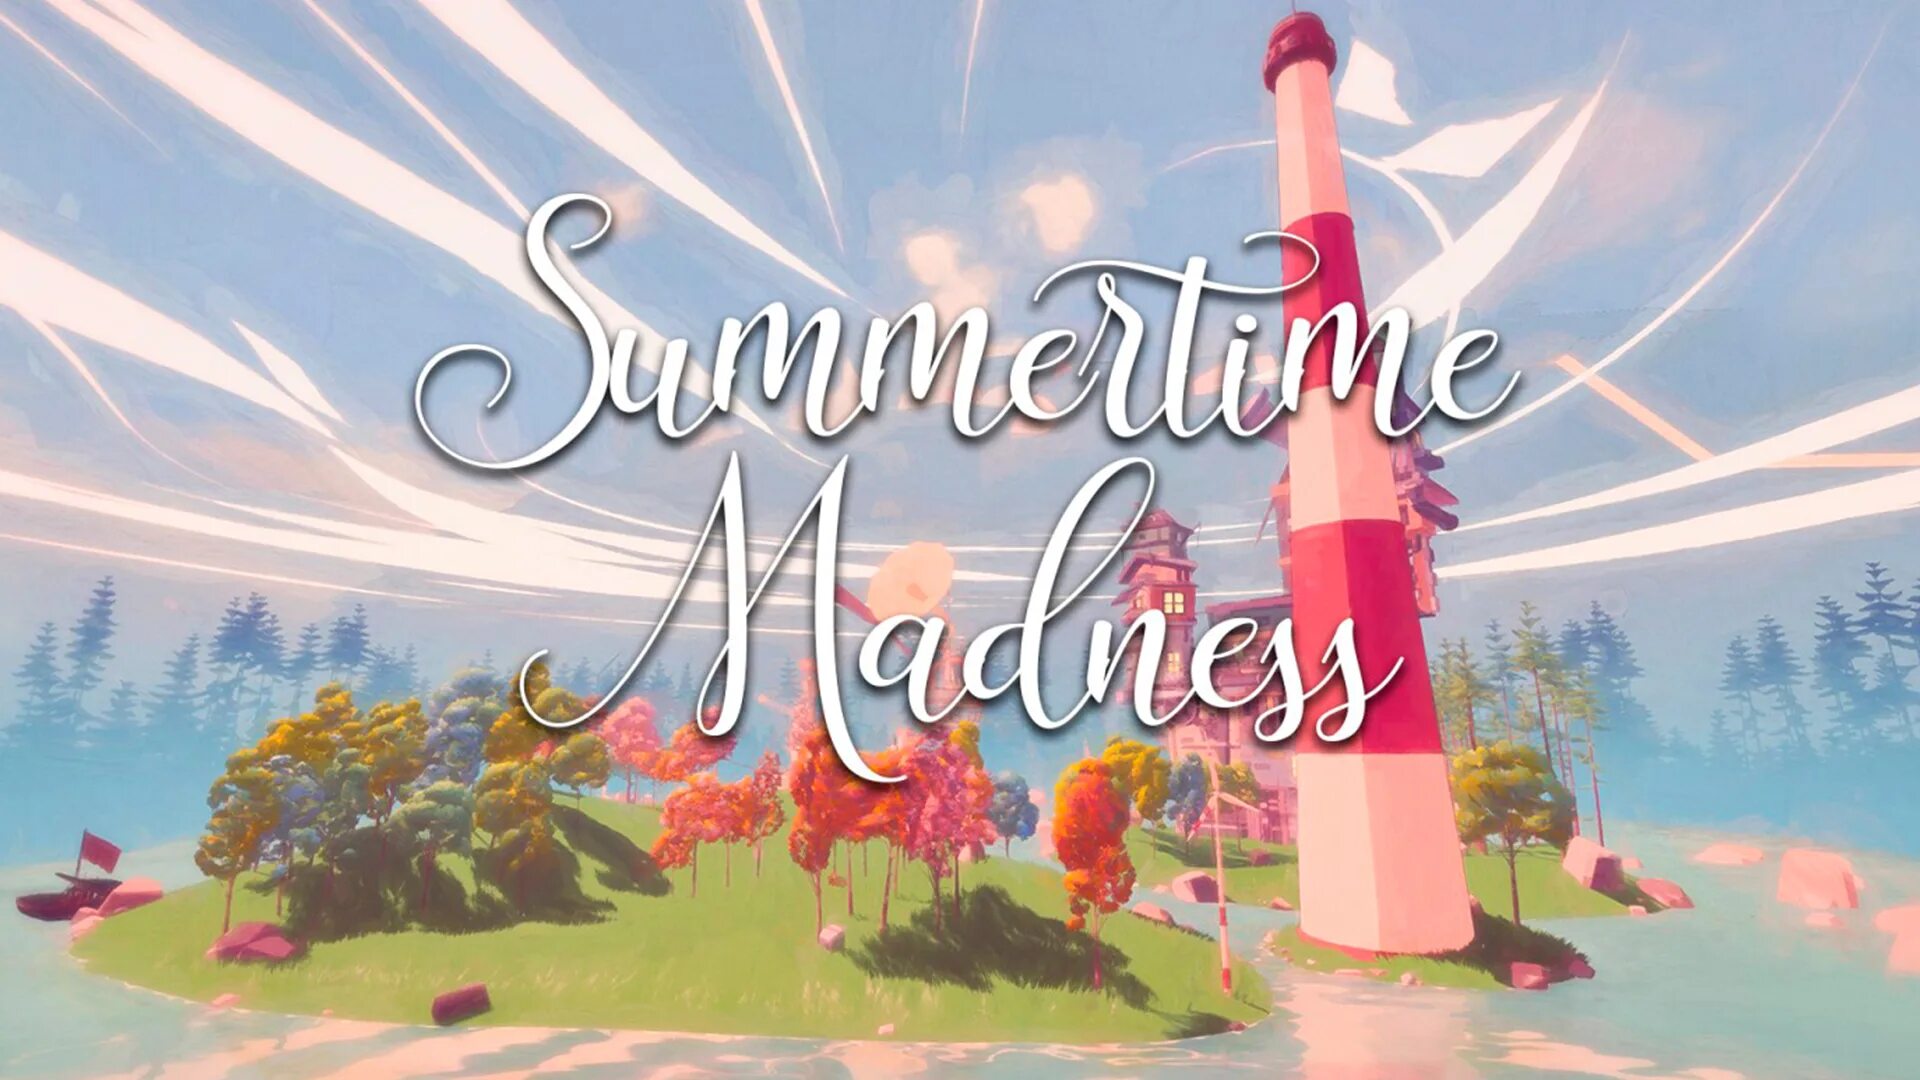 Summertime Madness game. Игра into the Wild Summertime Madness. Madness игра indie games. Summertime Madness обложка игры. Будь ярче игра